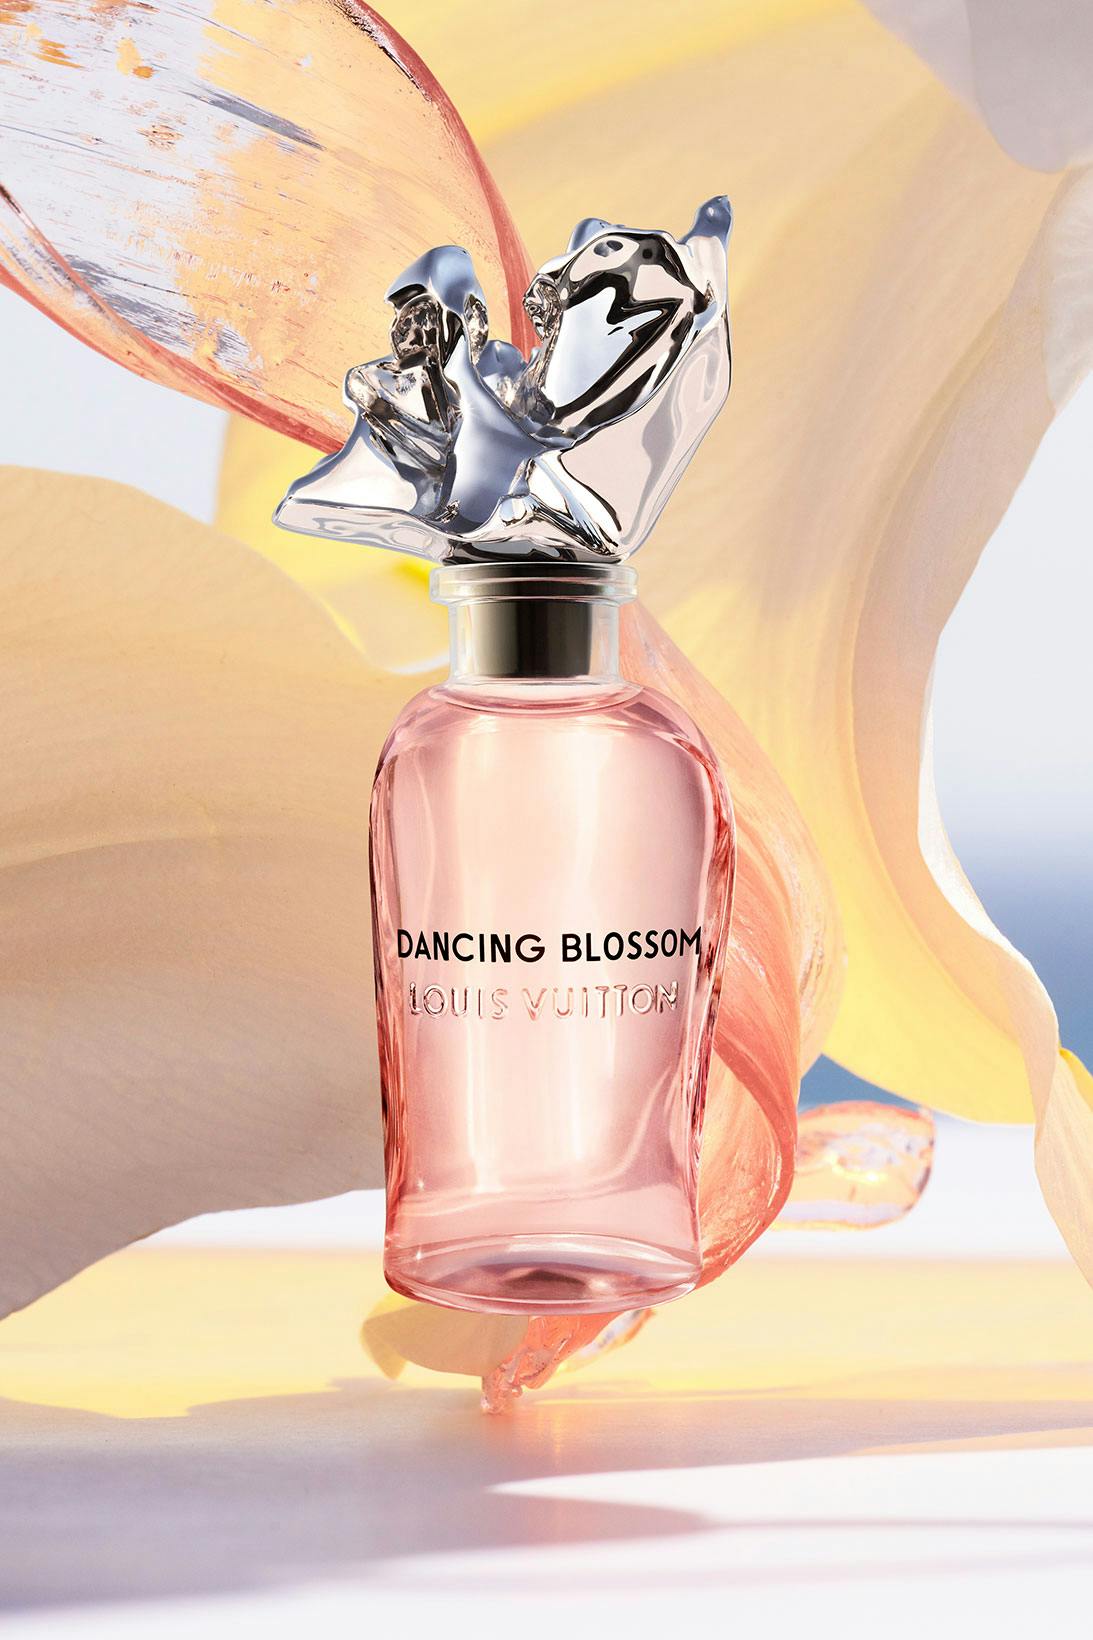 Louis Vuitton announces Frank Gehry's new fish-inspired perfume